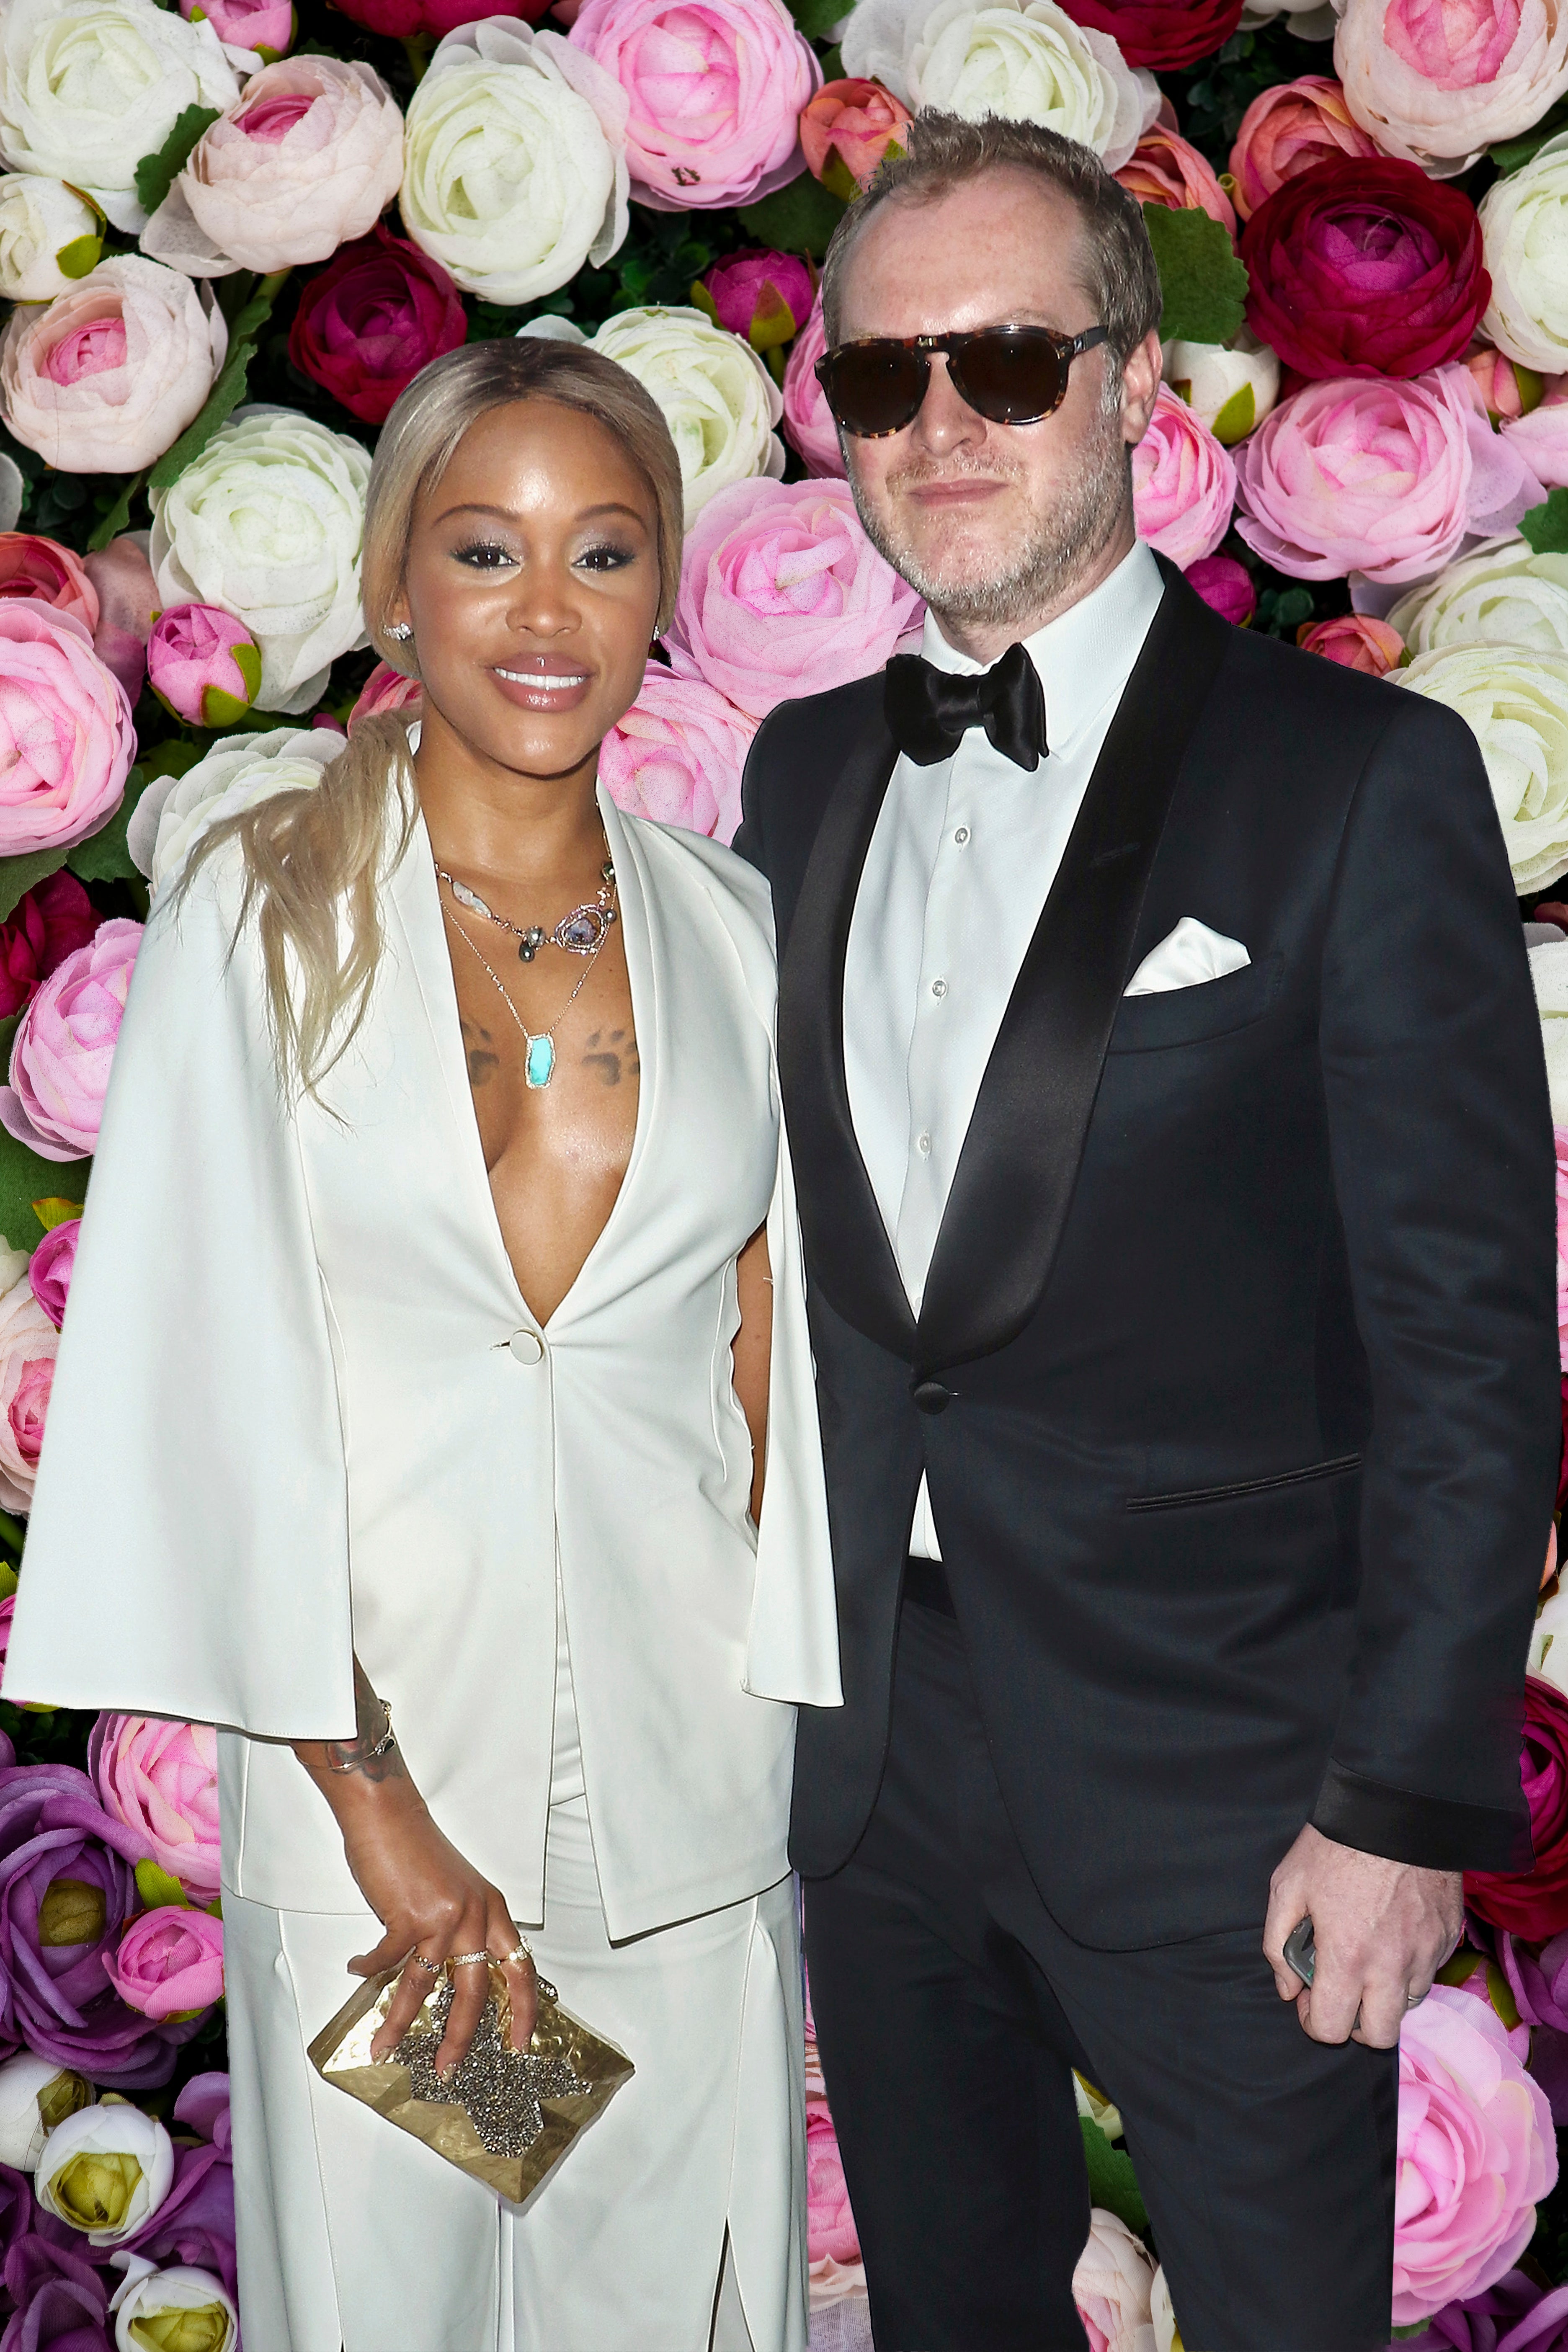 Here's Proof That Eve And Hubby Maximillion Cooper Are Living Their Best Baecation Lives
